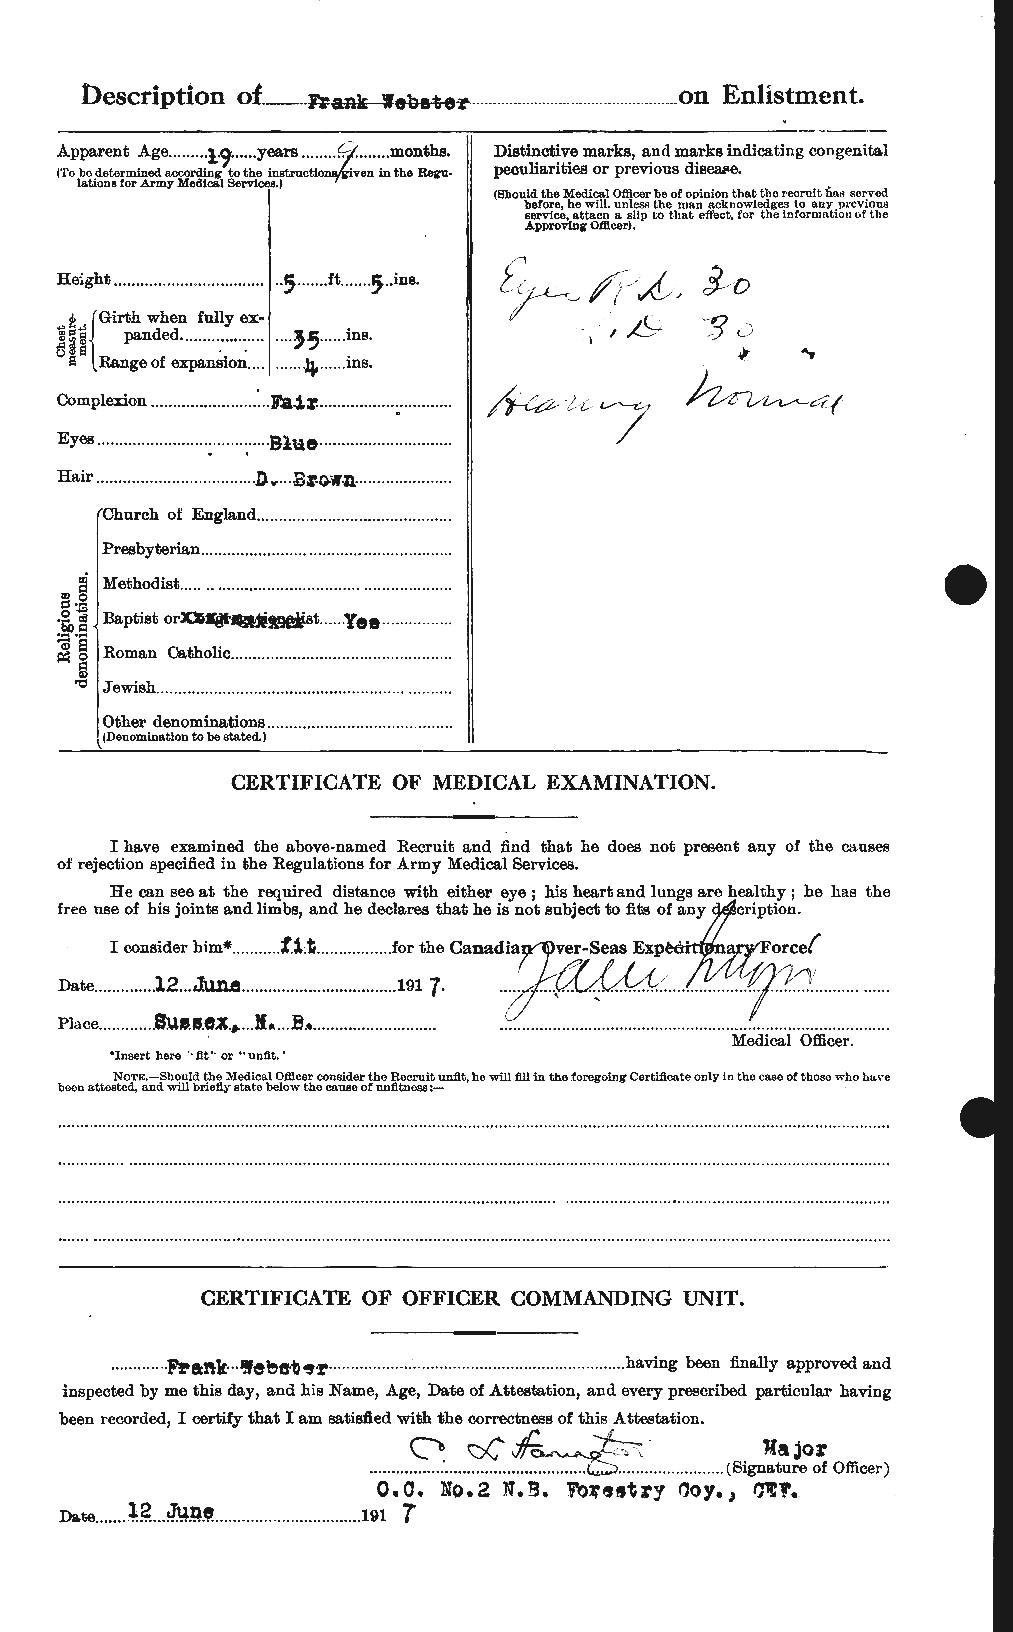 Personnel Records of the First World War - CEF 670350b